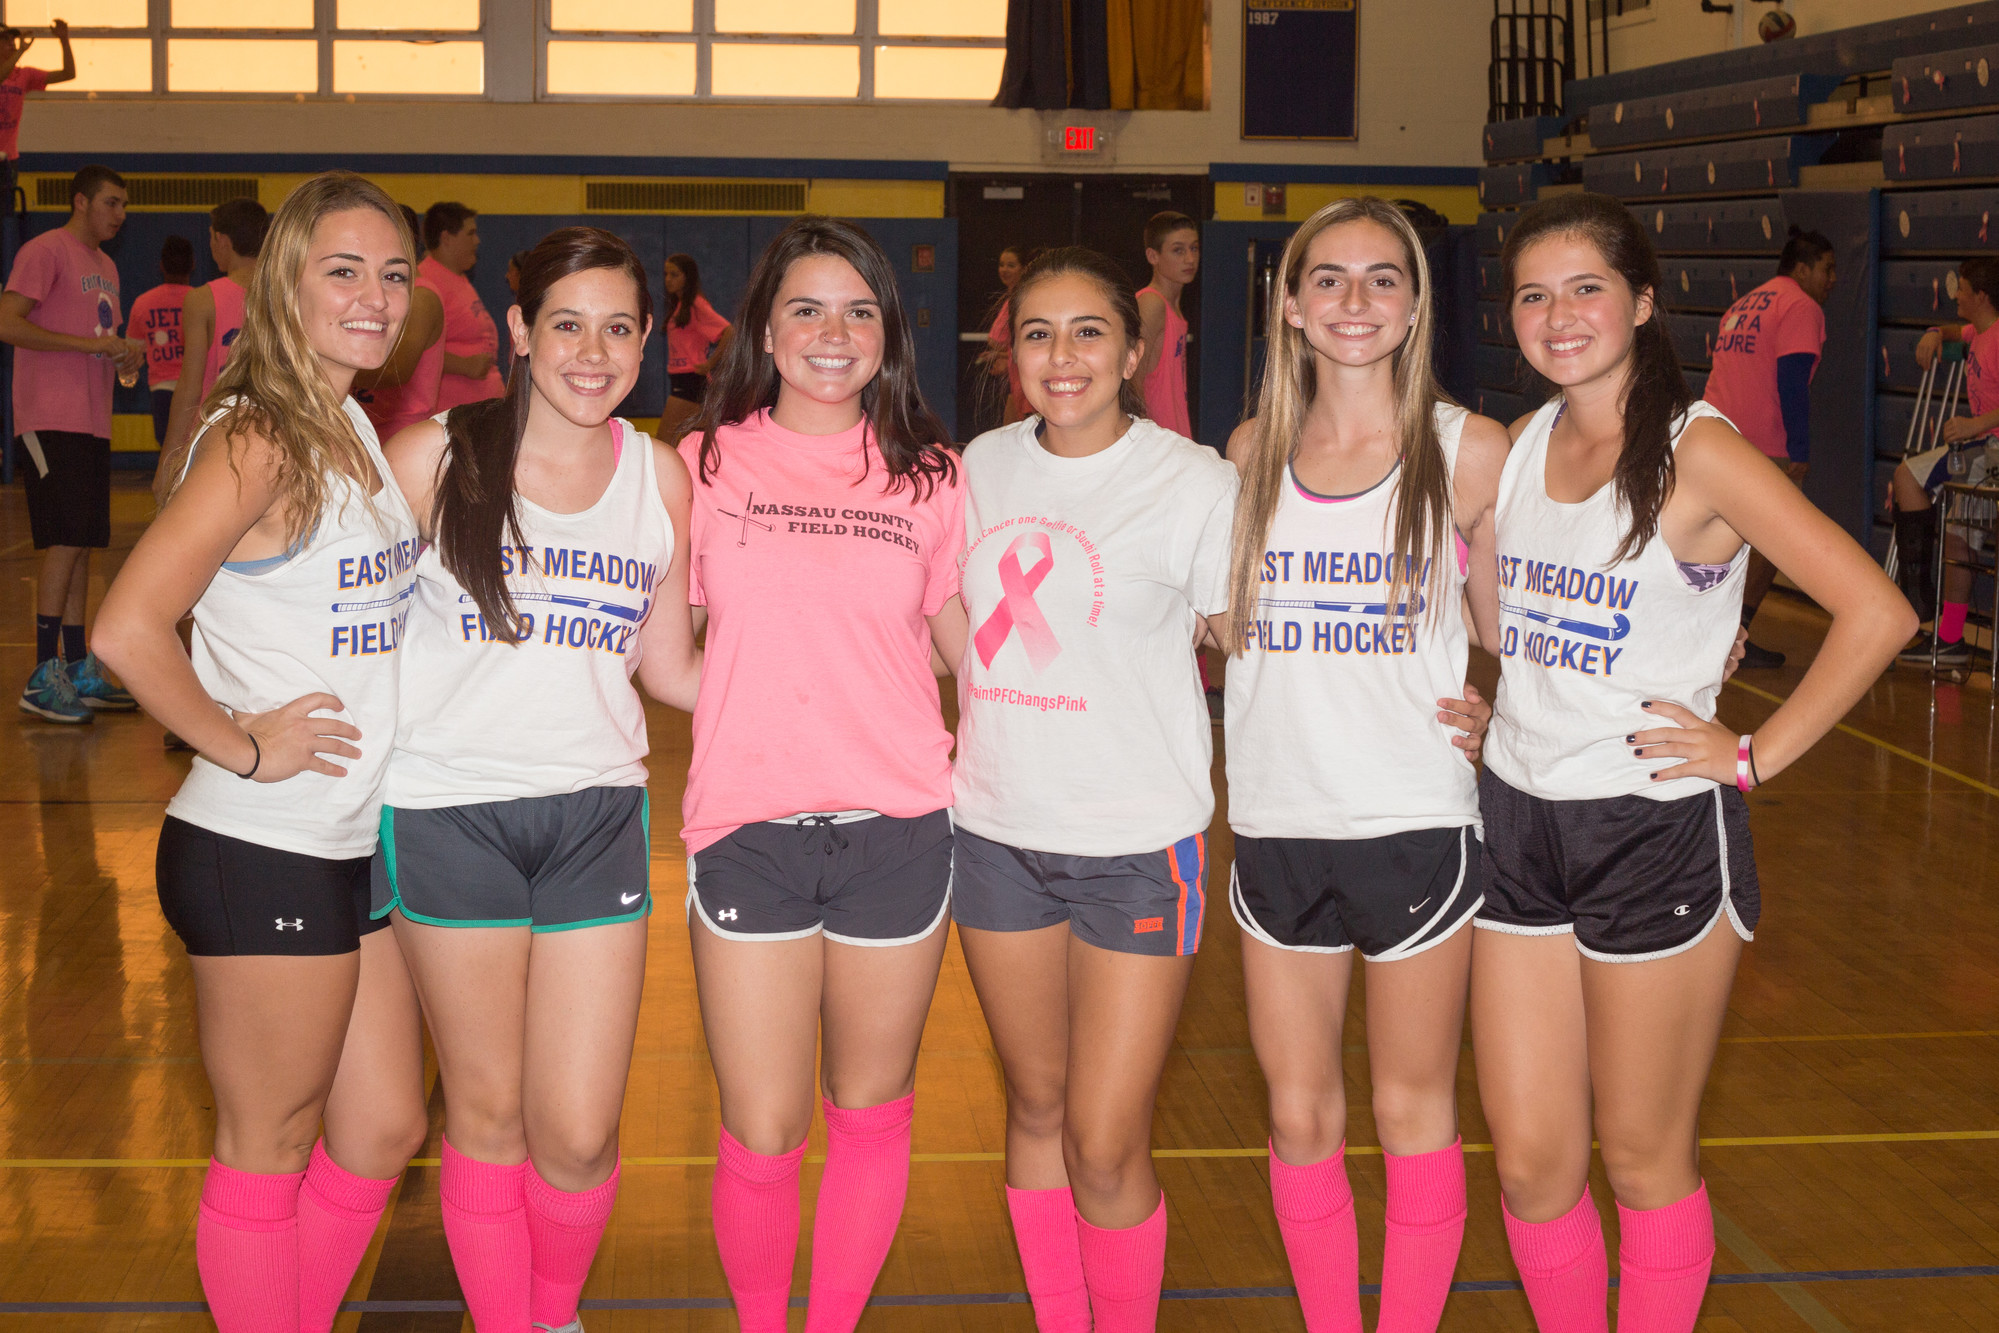 East meadow’s field hockey team took part in the unique tournament.